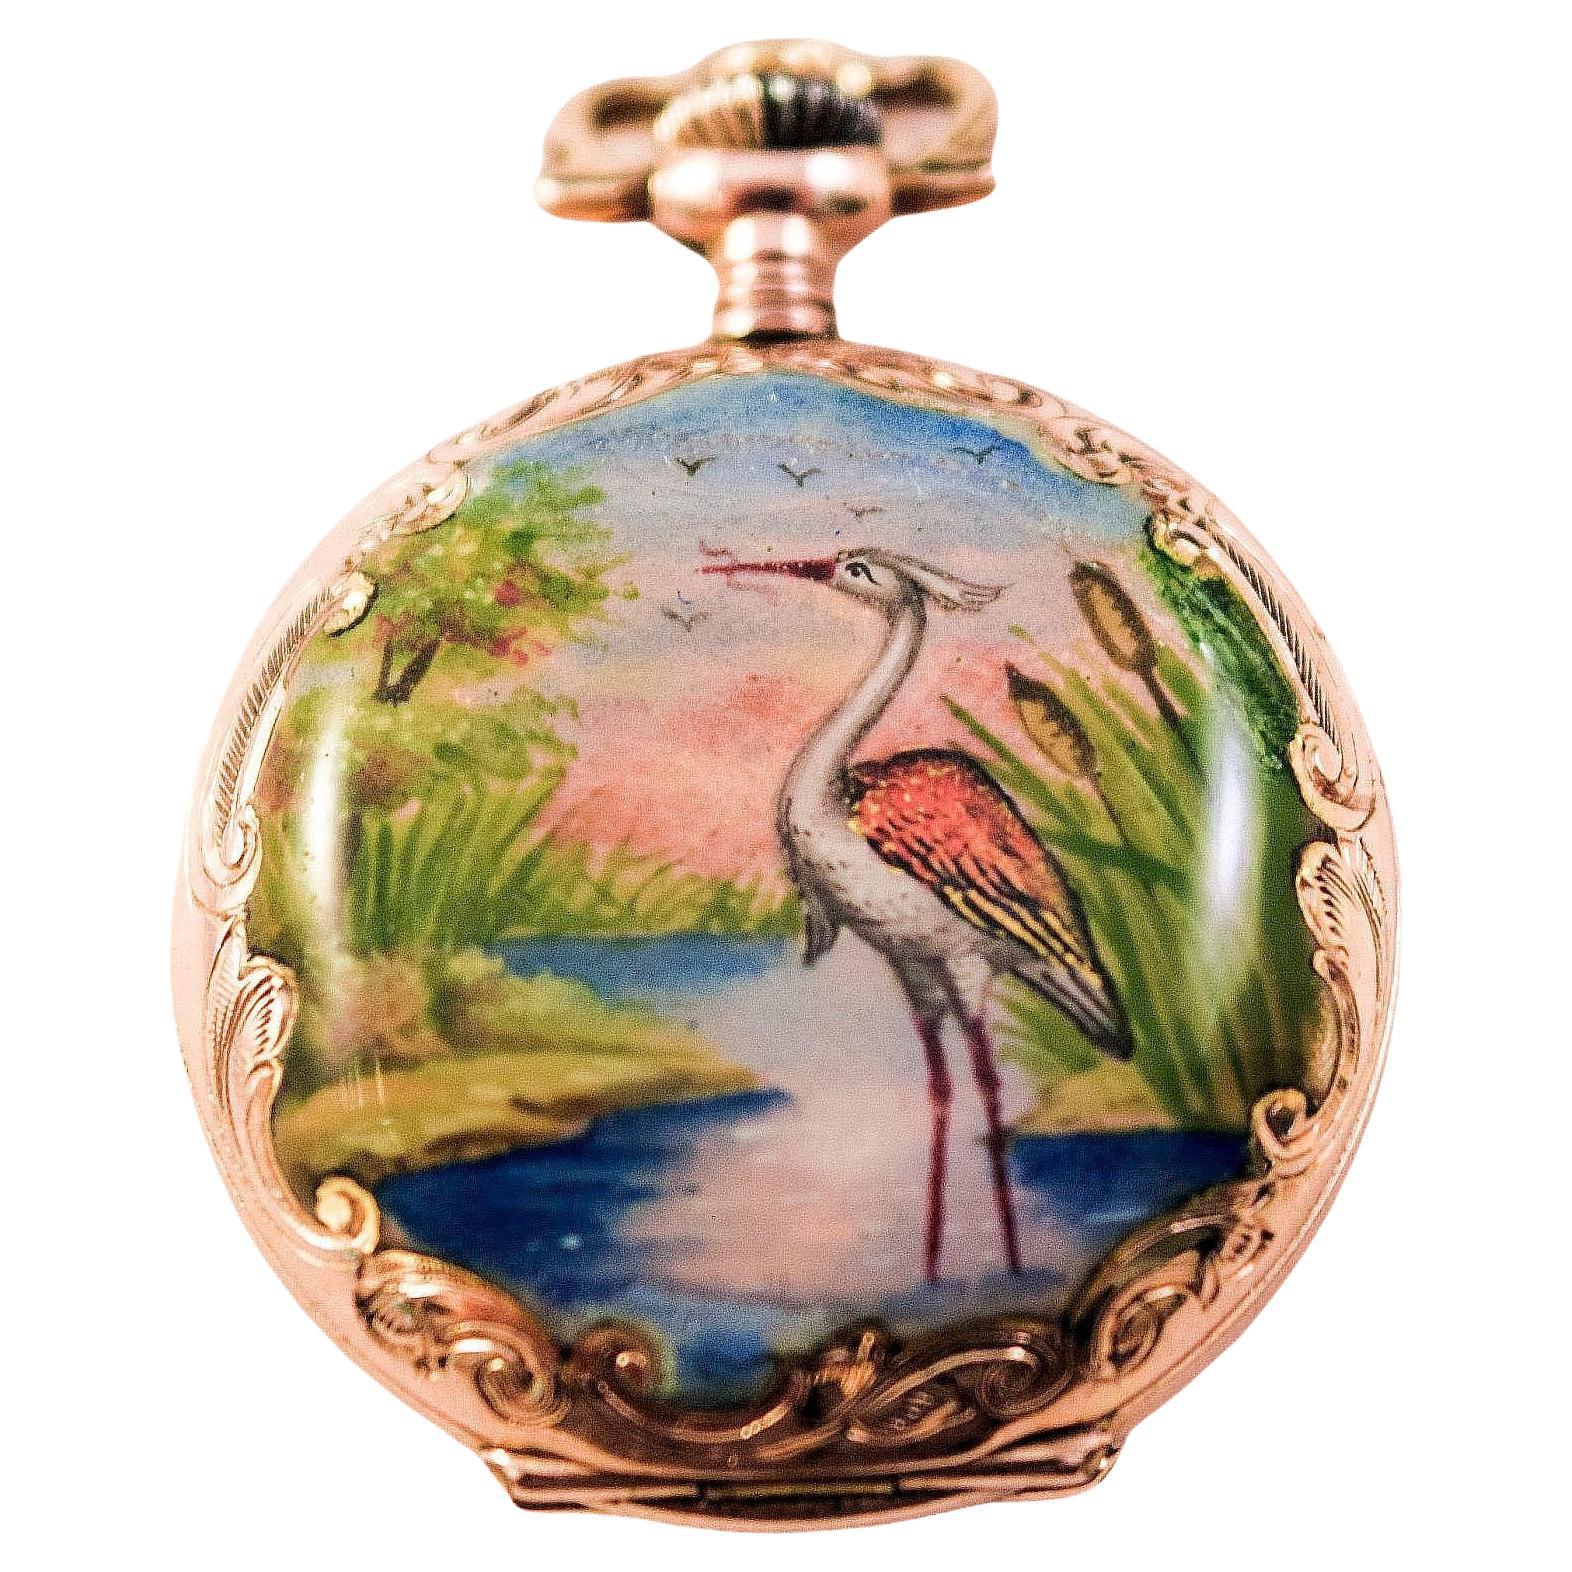 Enamel Pocket Watch Hunter case with lovely tropical landscapes and Heron enamel painting on the other side
Case is solid 14ct yellow gold,
 White circular dial with black painted numerals,
 one side with an enamelled scene of a tropical landscape,
